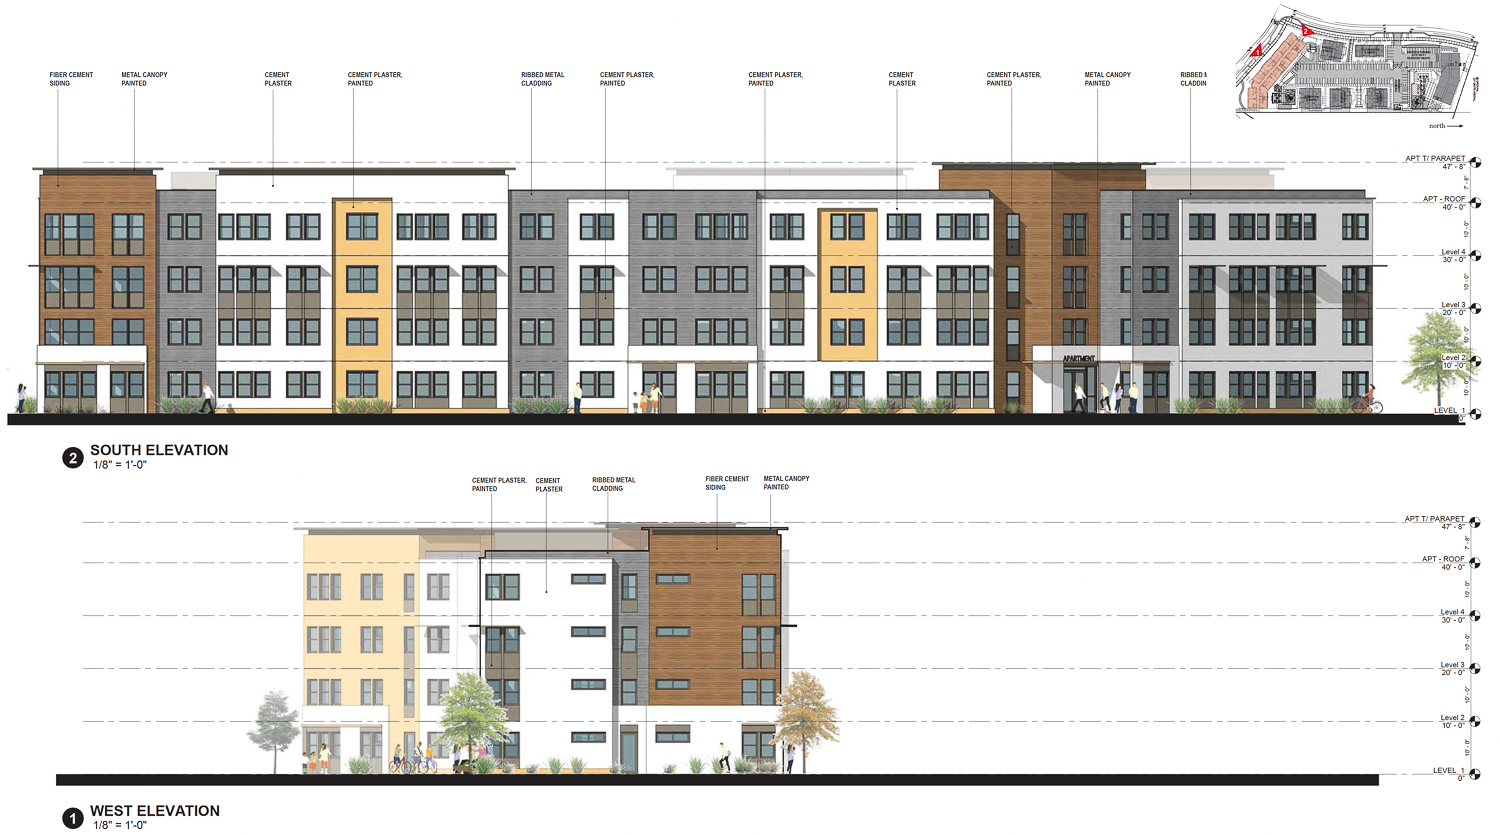 Mirasol Village Block D facade elevation for the apartment building, rendering by SVA Architects